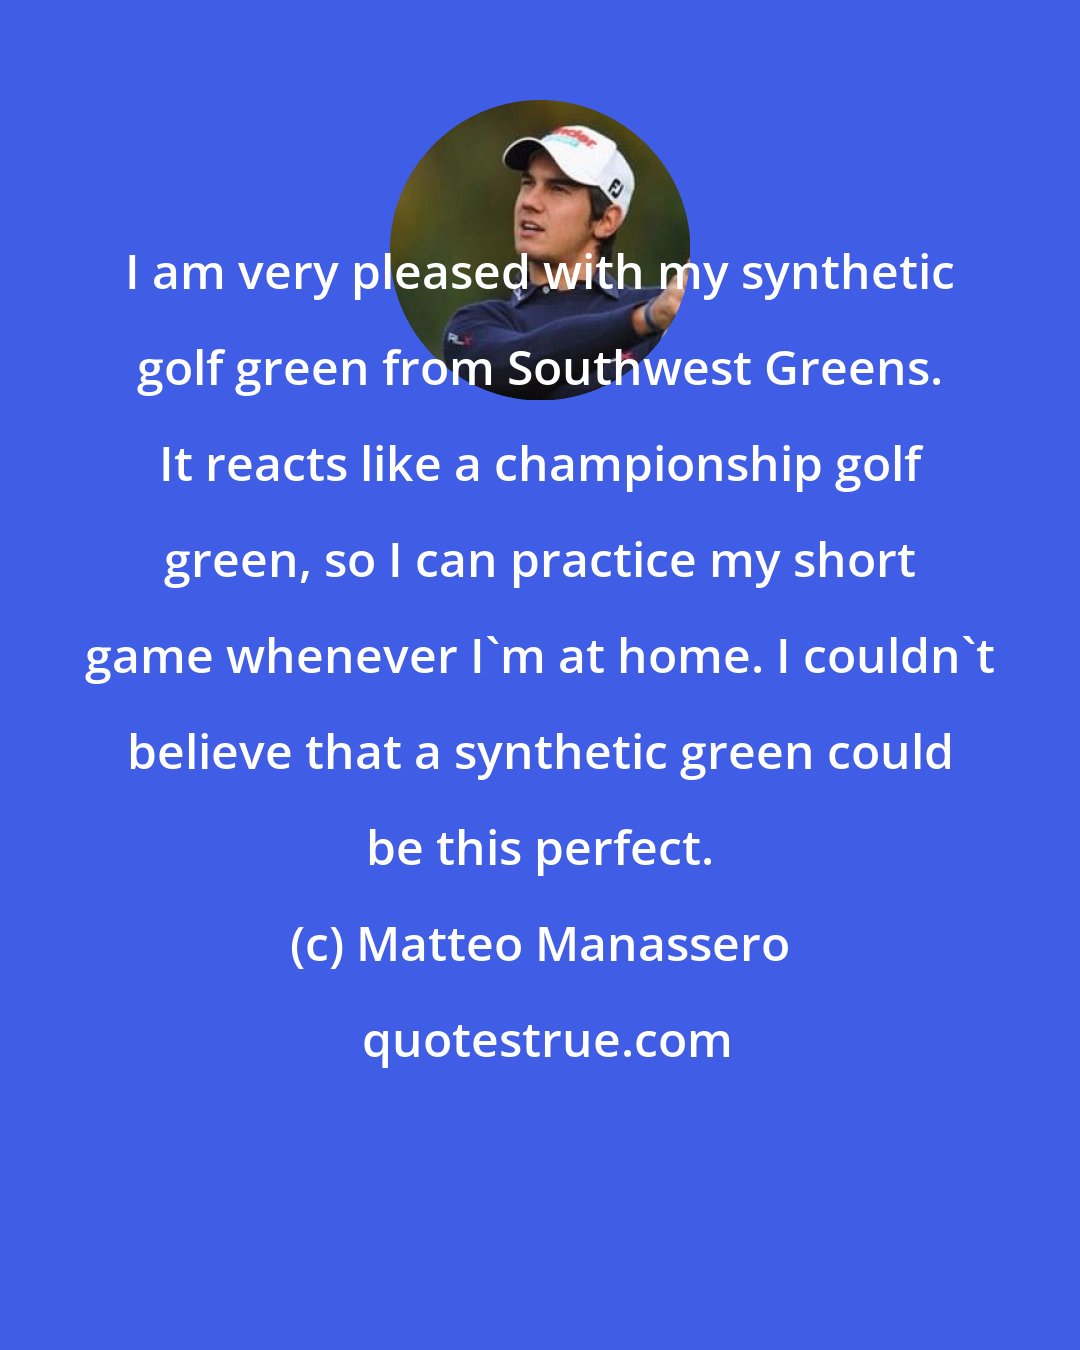 Matteo Manassero: I am very pleased with my synthetic golf green from Southwest Greens. It reacts like a championship golf green, so I can practice my short game whenever I'm at home. I couldn't believe that a synthetic green could be this perfect.